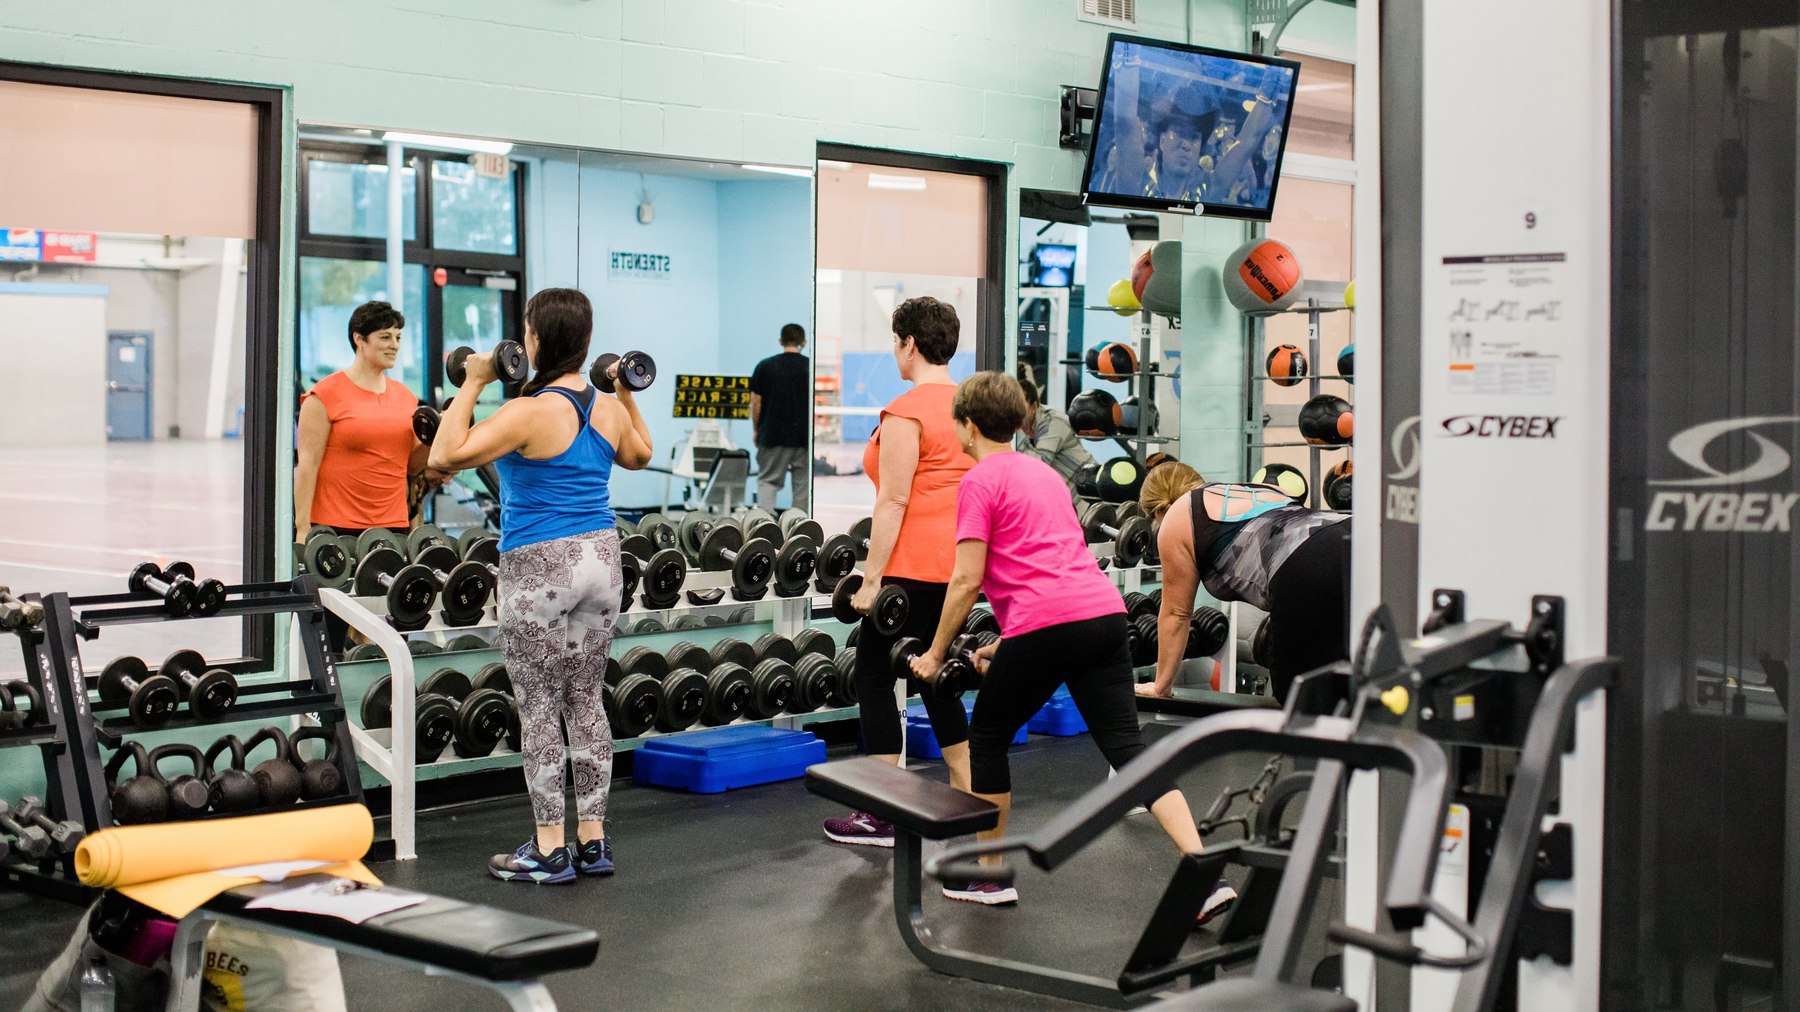 Four people work out in the fitness center lifting weights in front of mirror